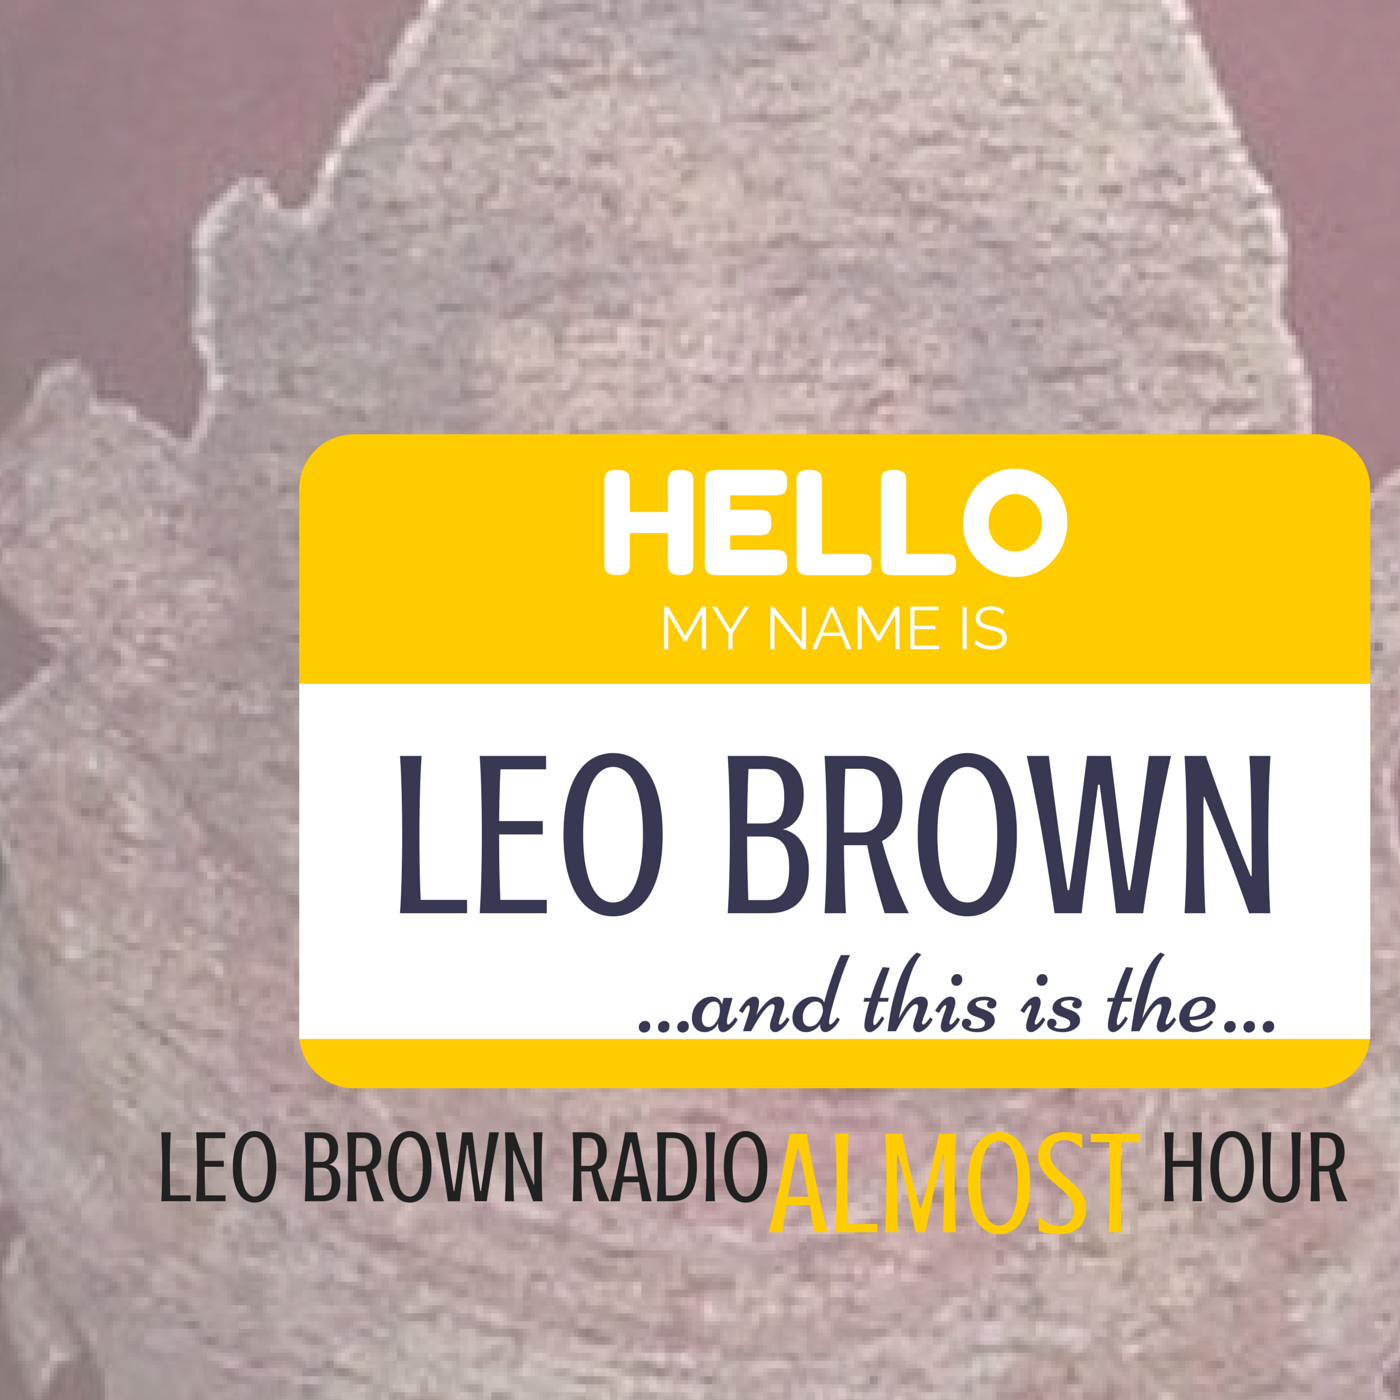 Leo Brown Almost Hour 02/23/17